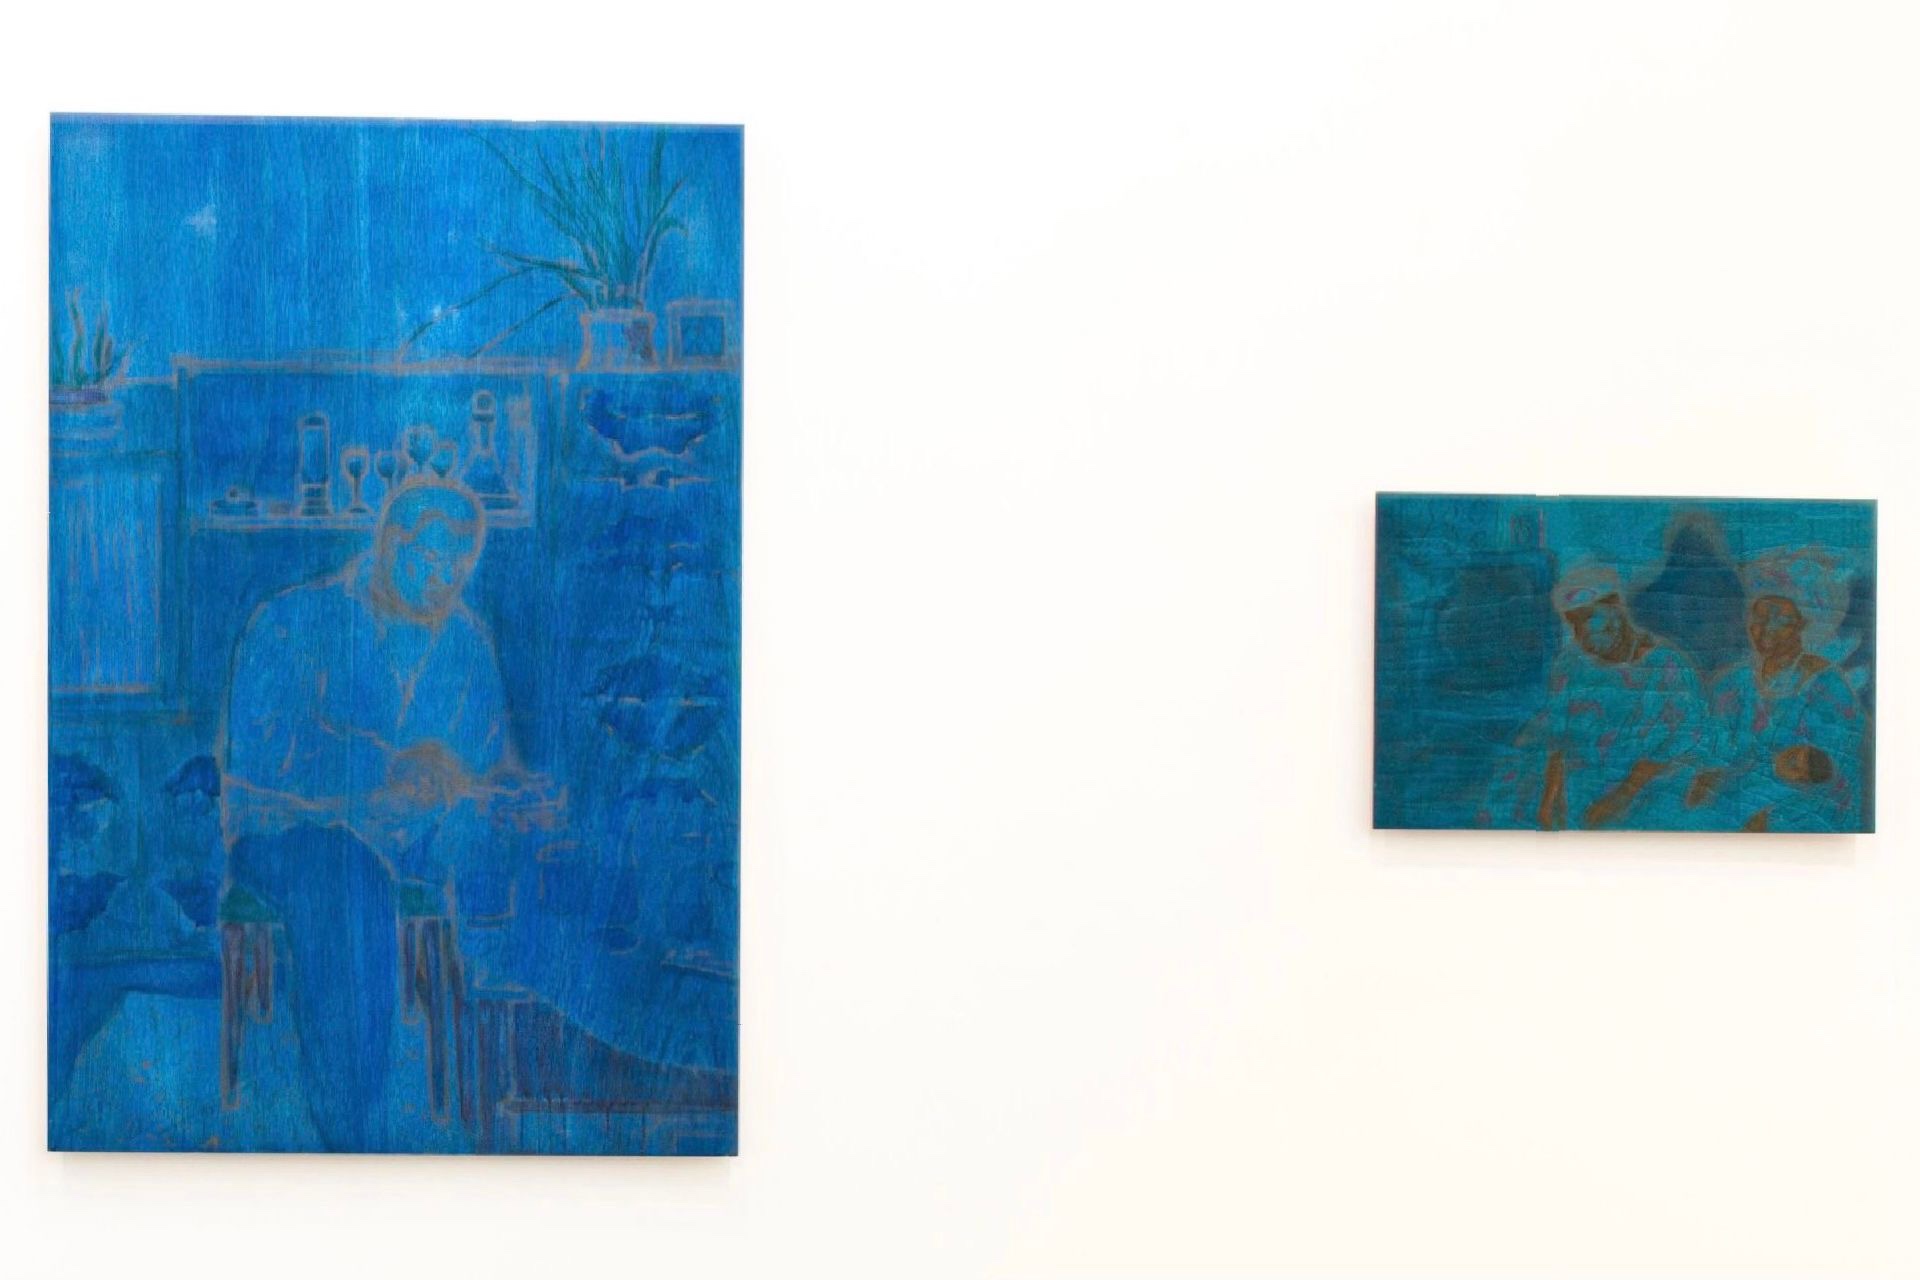 An installation shot of two works, on the left is a larger scale painting on wood. The figure is located in a blue hued domestic space, he seems to be holding a table knife and a slice of bread. 